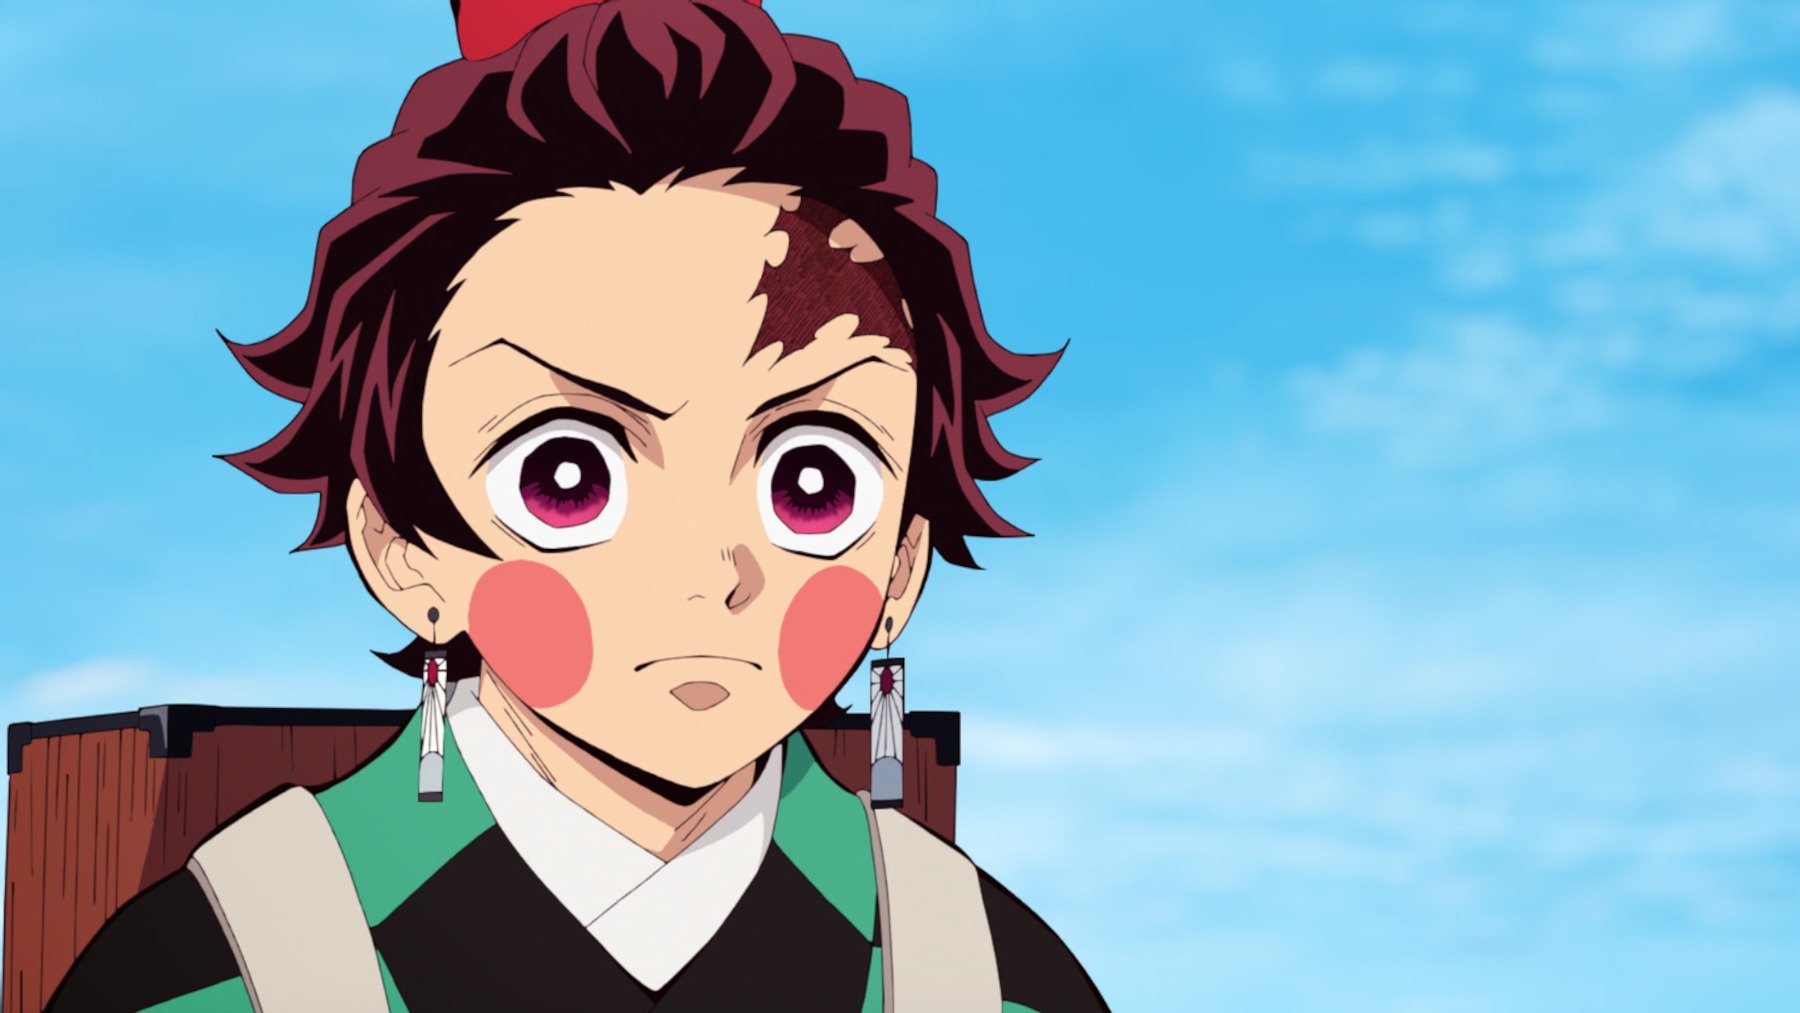 Tanjiro wearing makeup for his undercover mission in 'Demon Slayer' Season 2's Entertainment District Arc